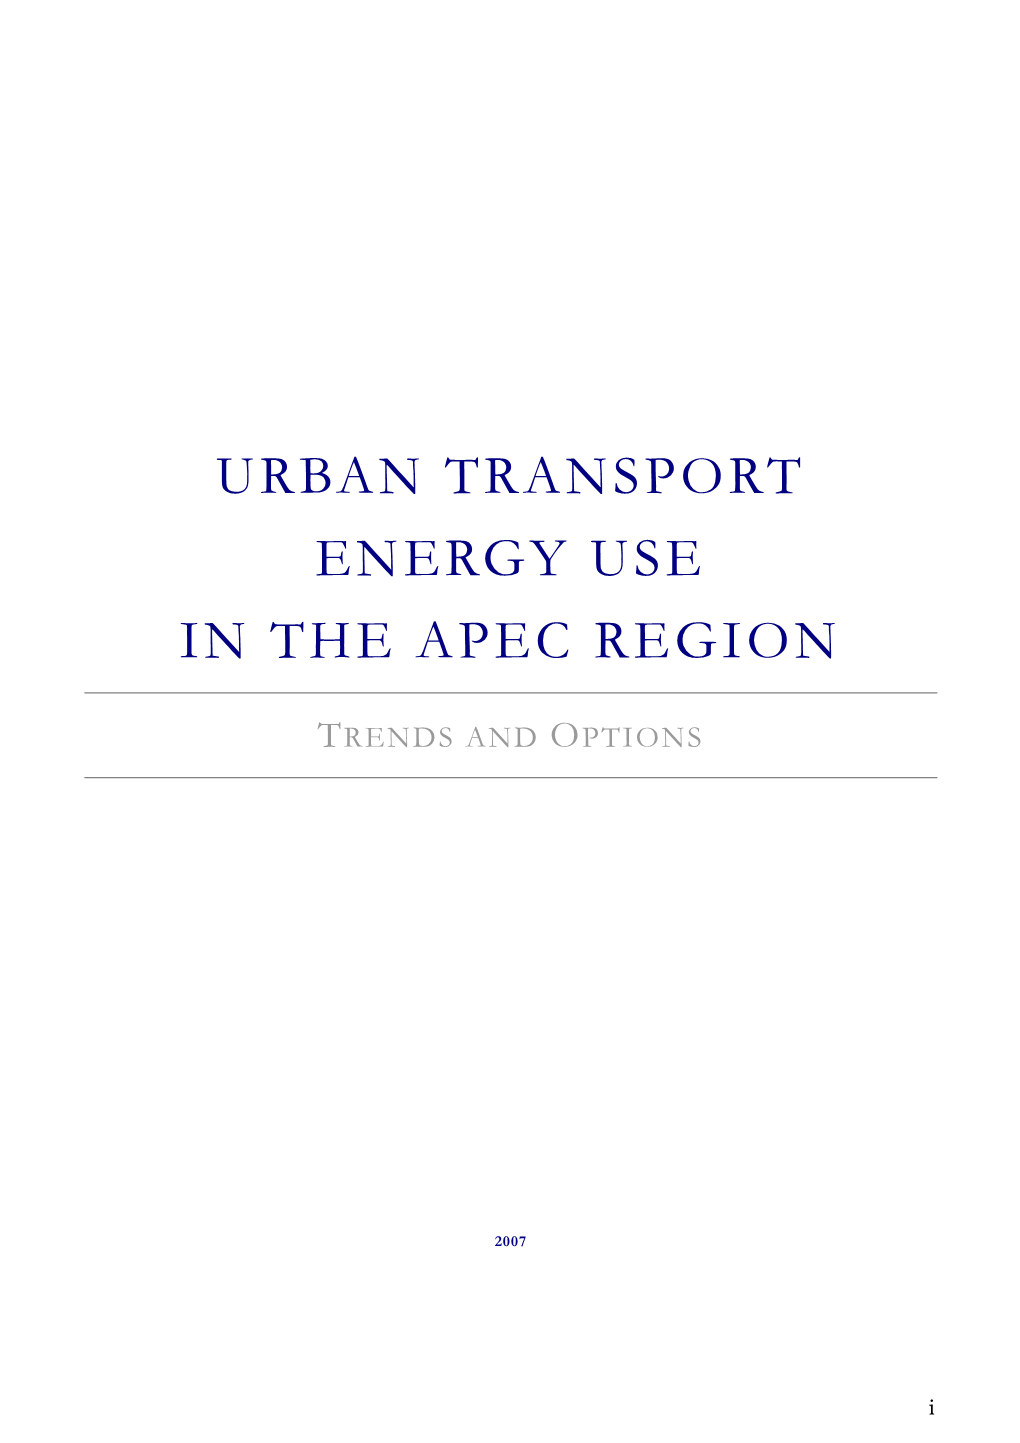 Urban Transport Energy Use in the APEC Region: Trends and Options